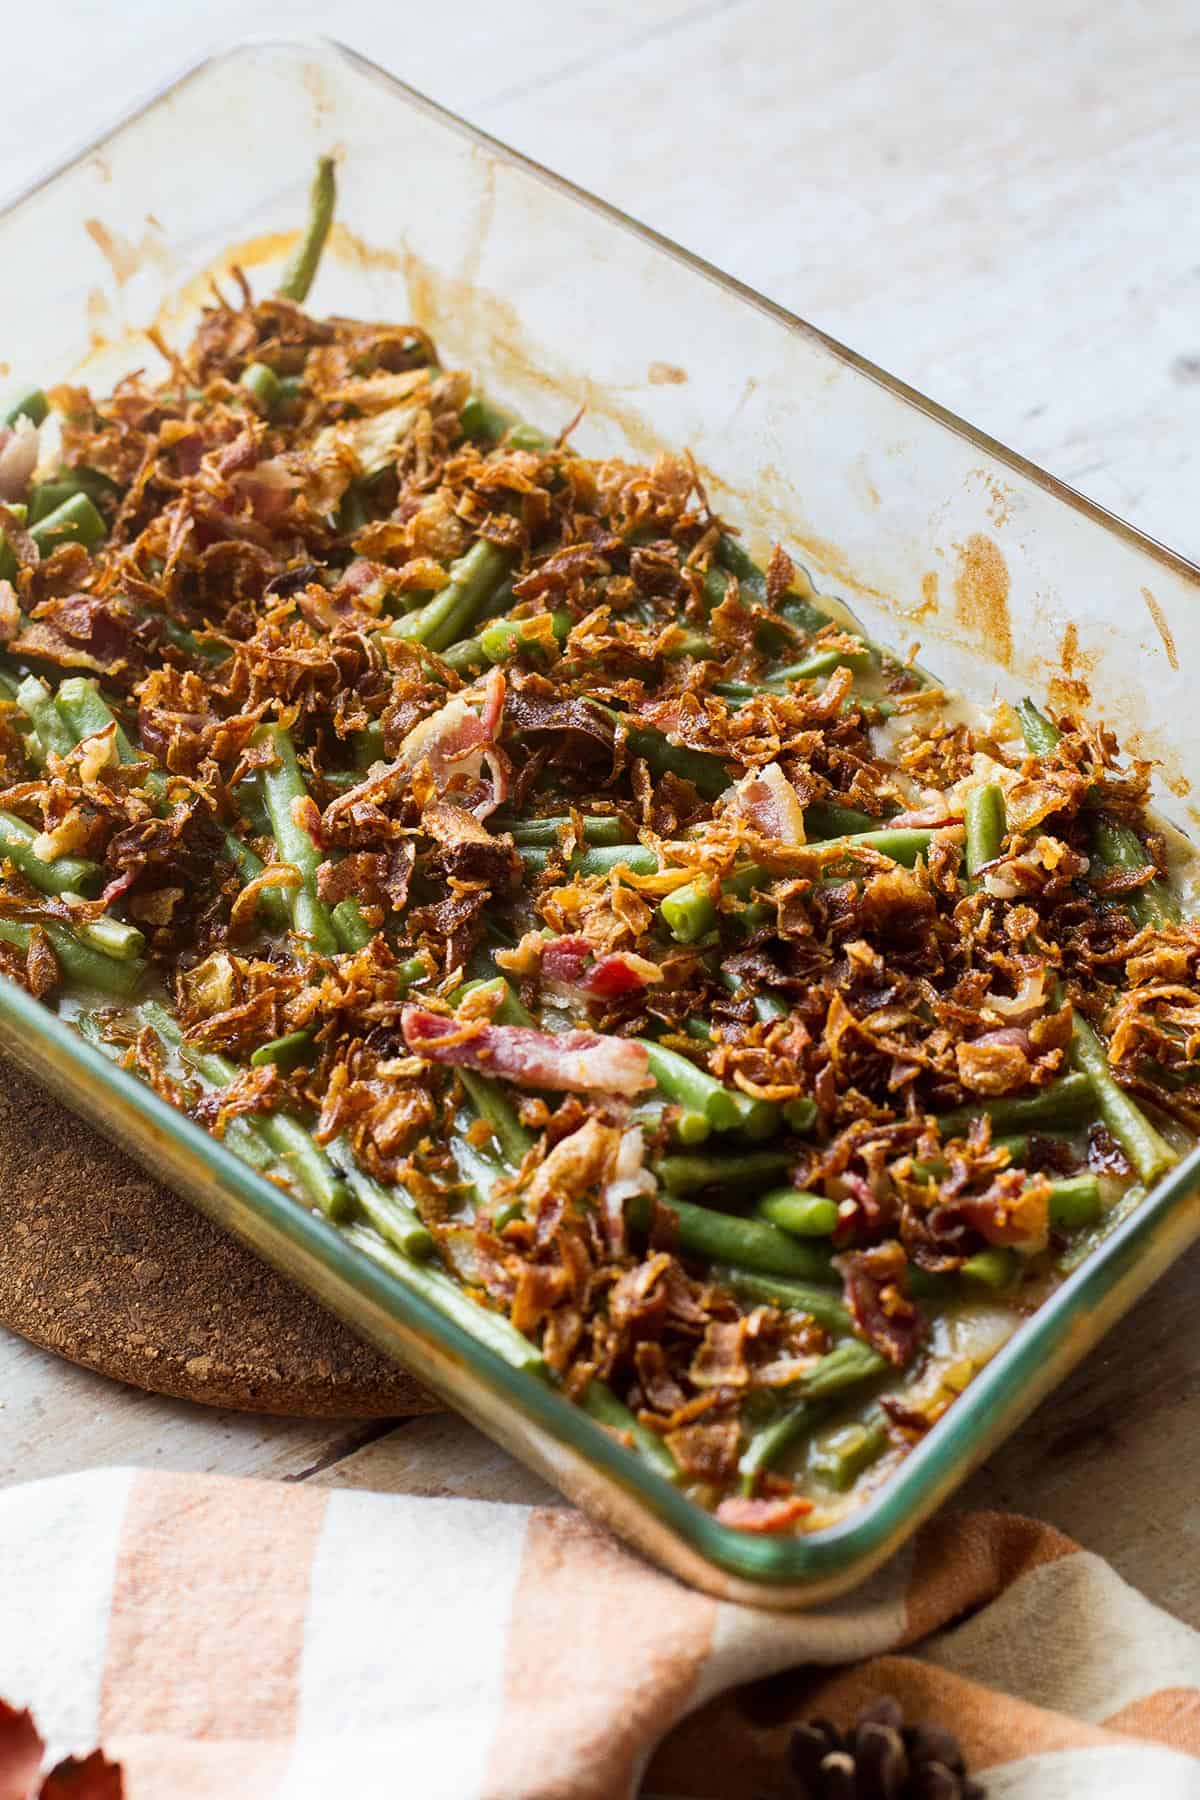 Green bean casserole with crispy onion on top in a glass dish.